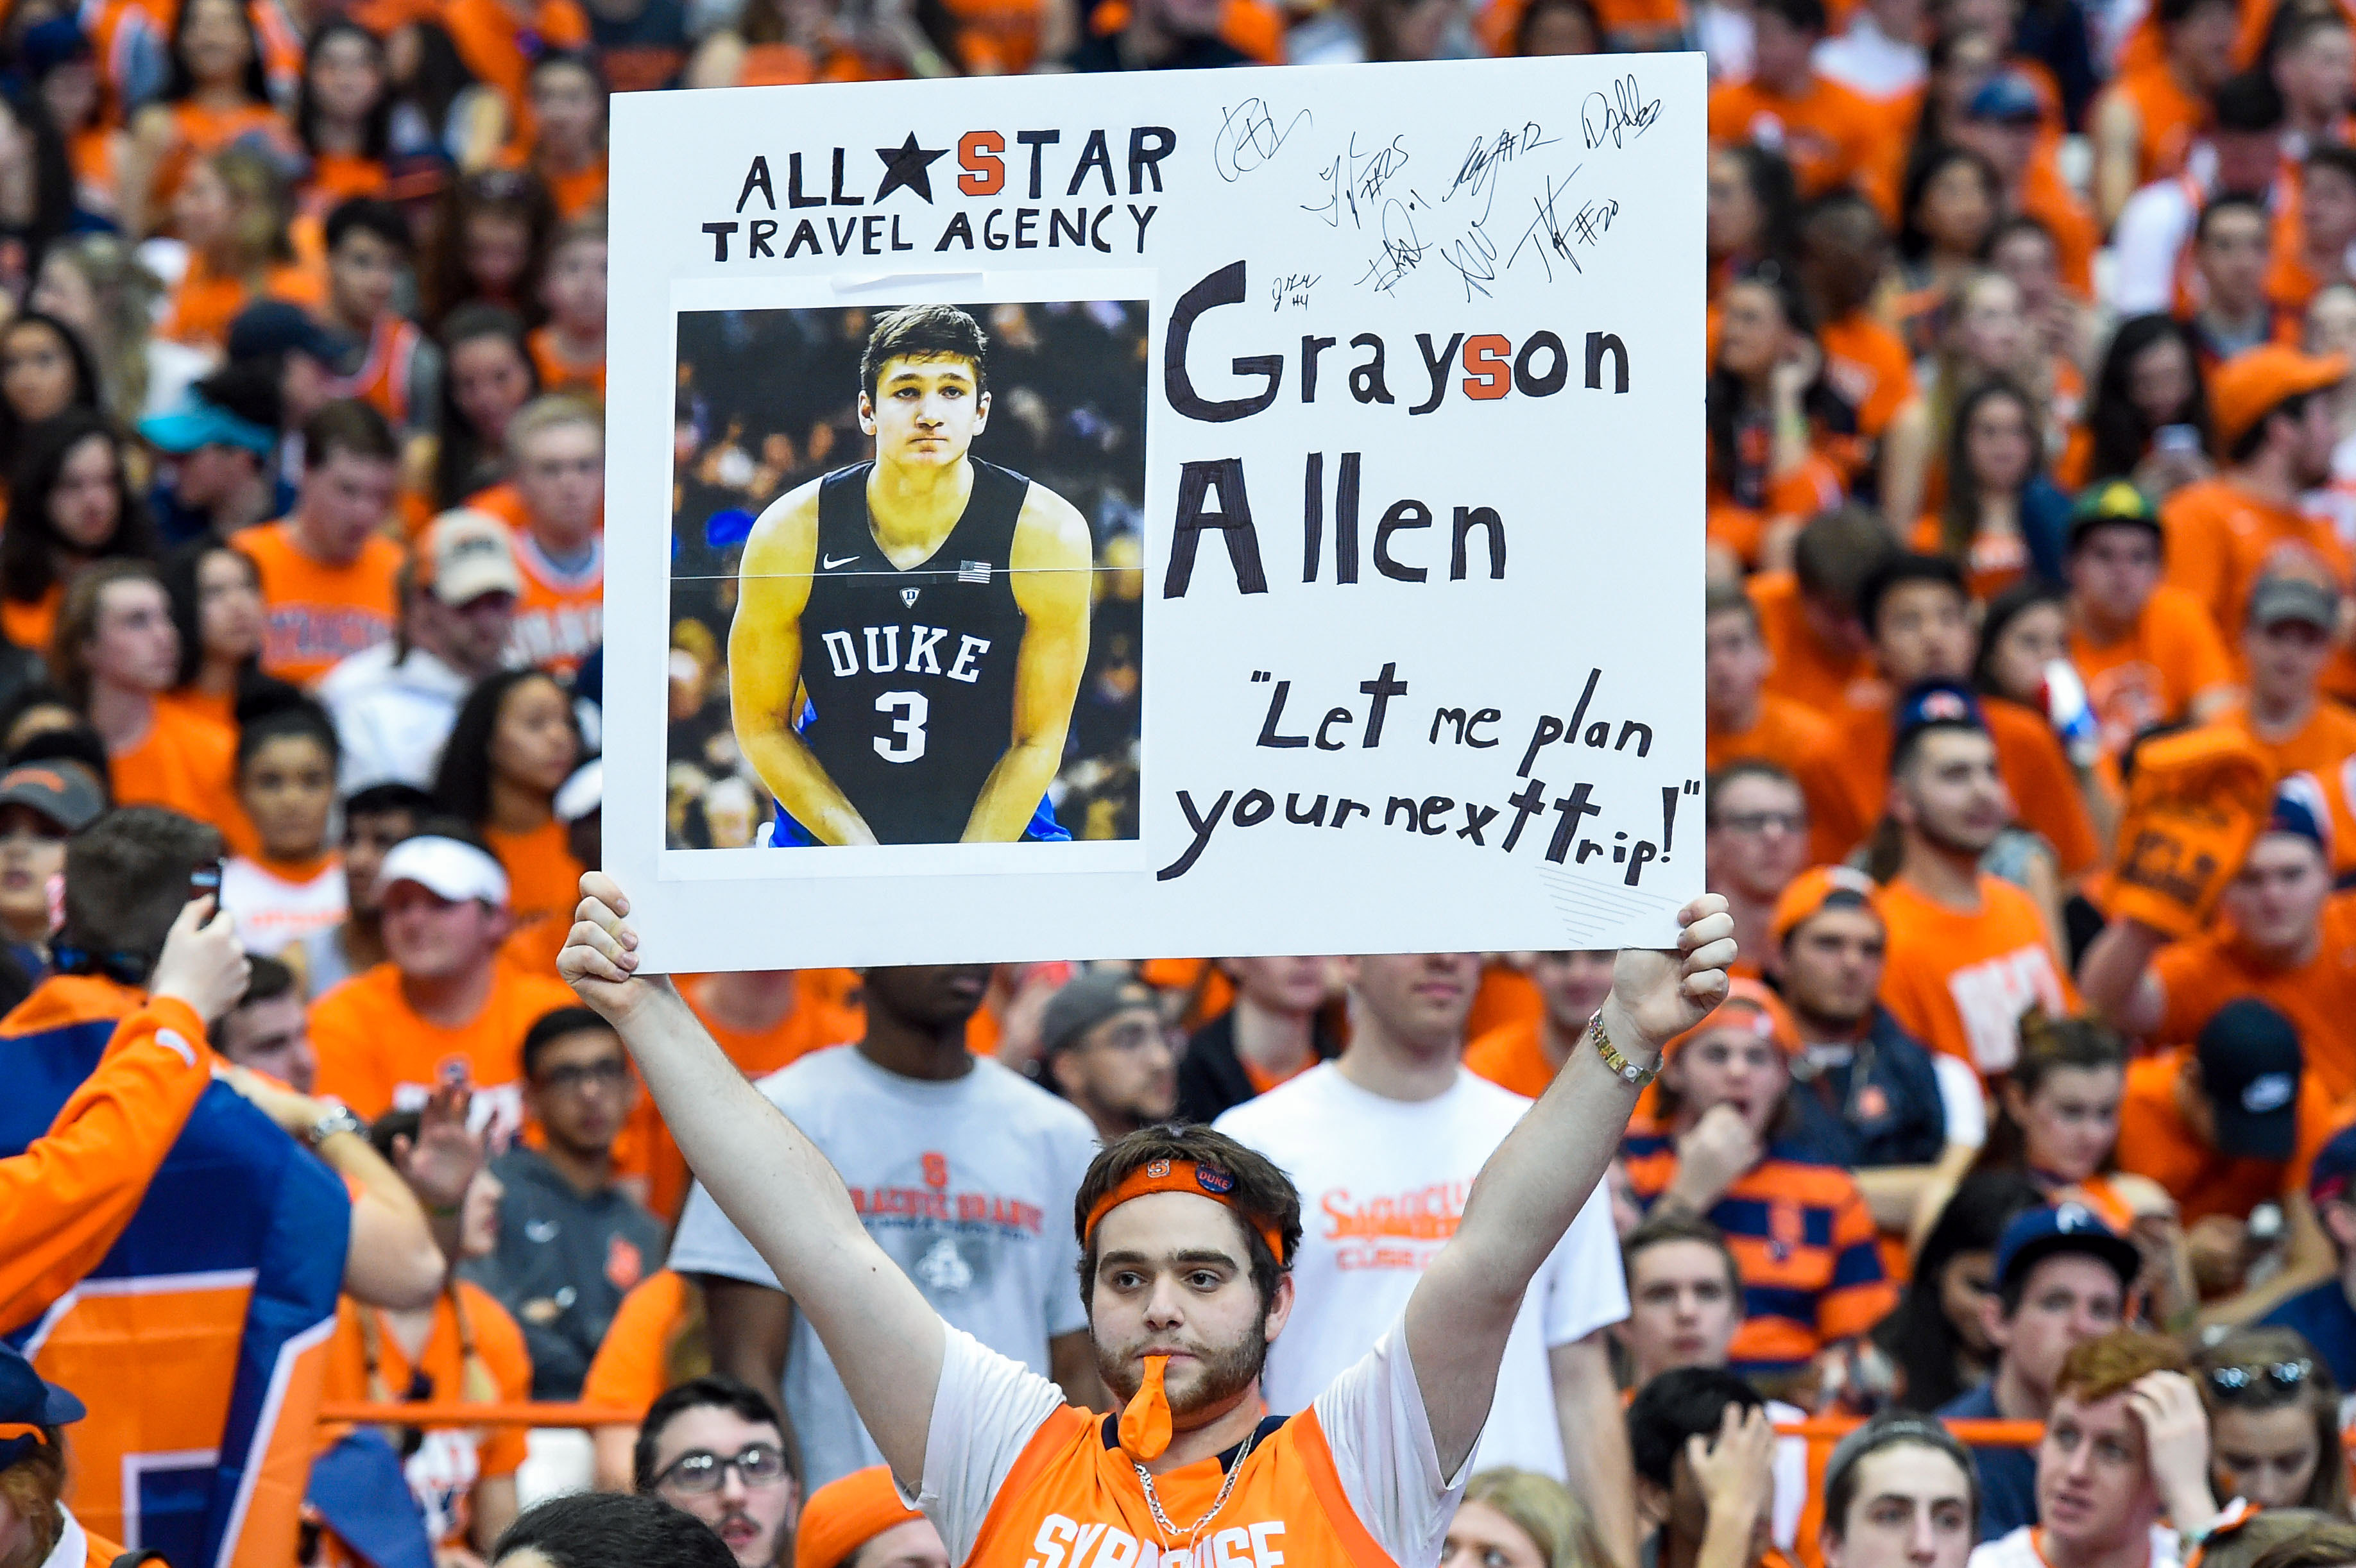 Feb 22, 2017; Syracuse, NY, USA; A Syracuse Orange fan holds a sign for Duke Blue Devils guard Grayson Allen (not pictured) prior to the game at the Carrier Dome. Mandatory Credit: Rich Barnes-USA TODAY Sports ORG XMIT: USATSI-336548 ORIG FILE ID:  20170222_pjc_ai8_697.JPG